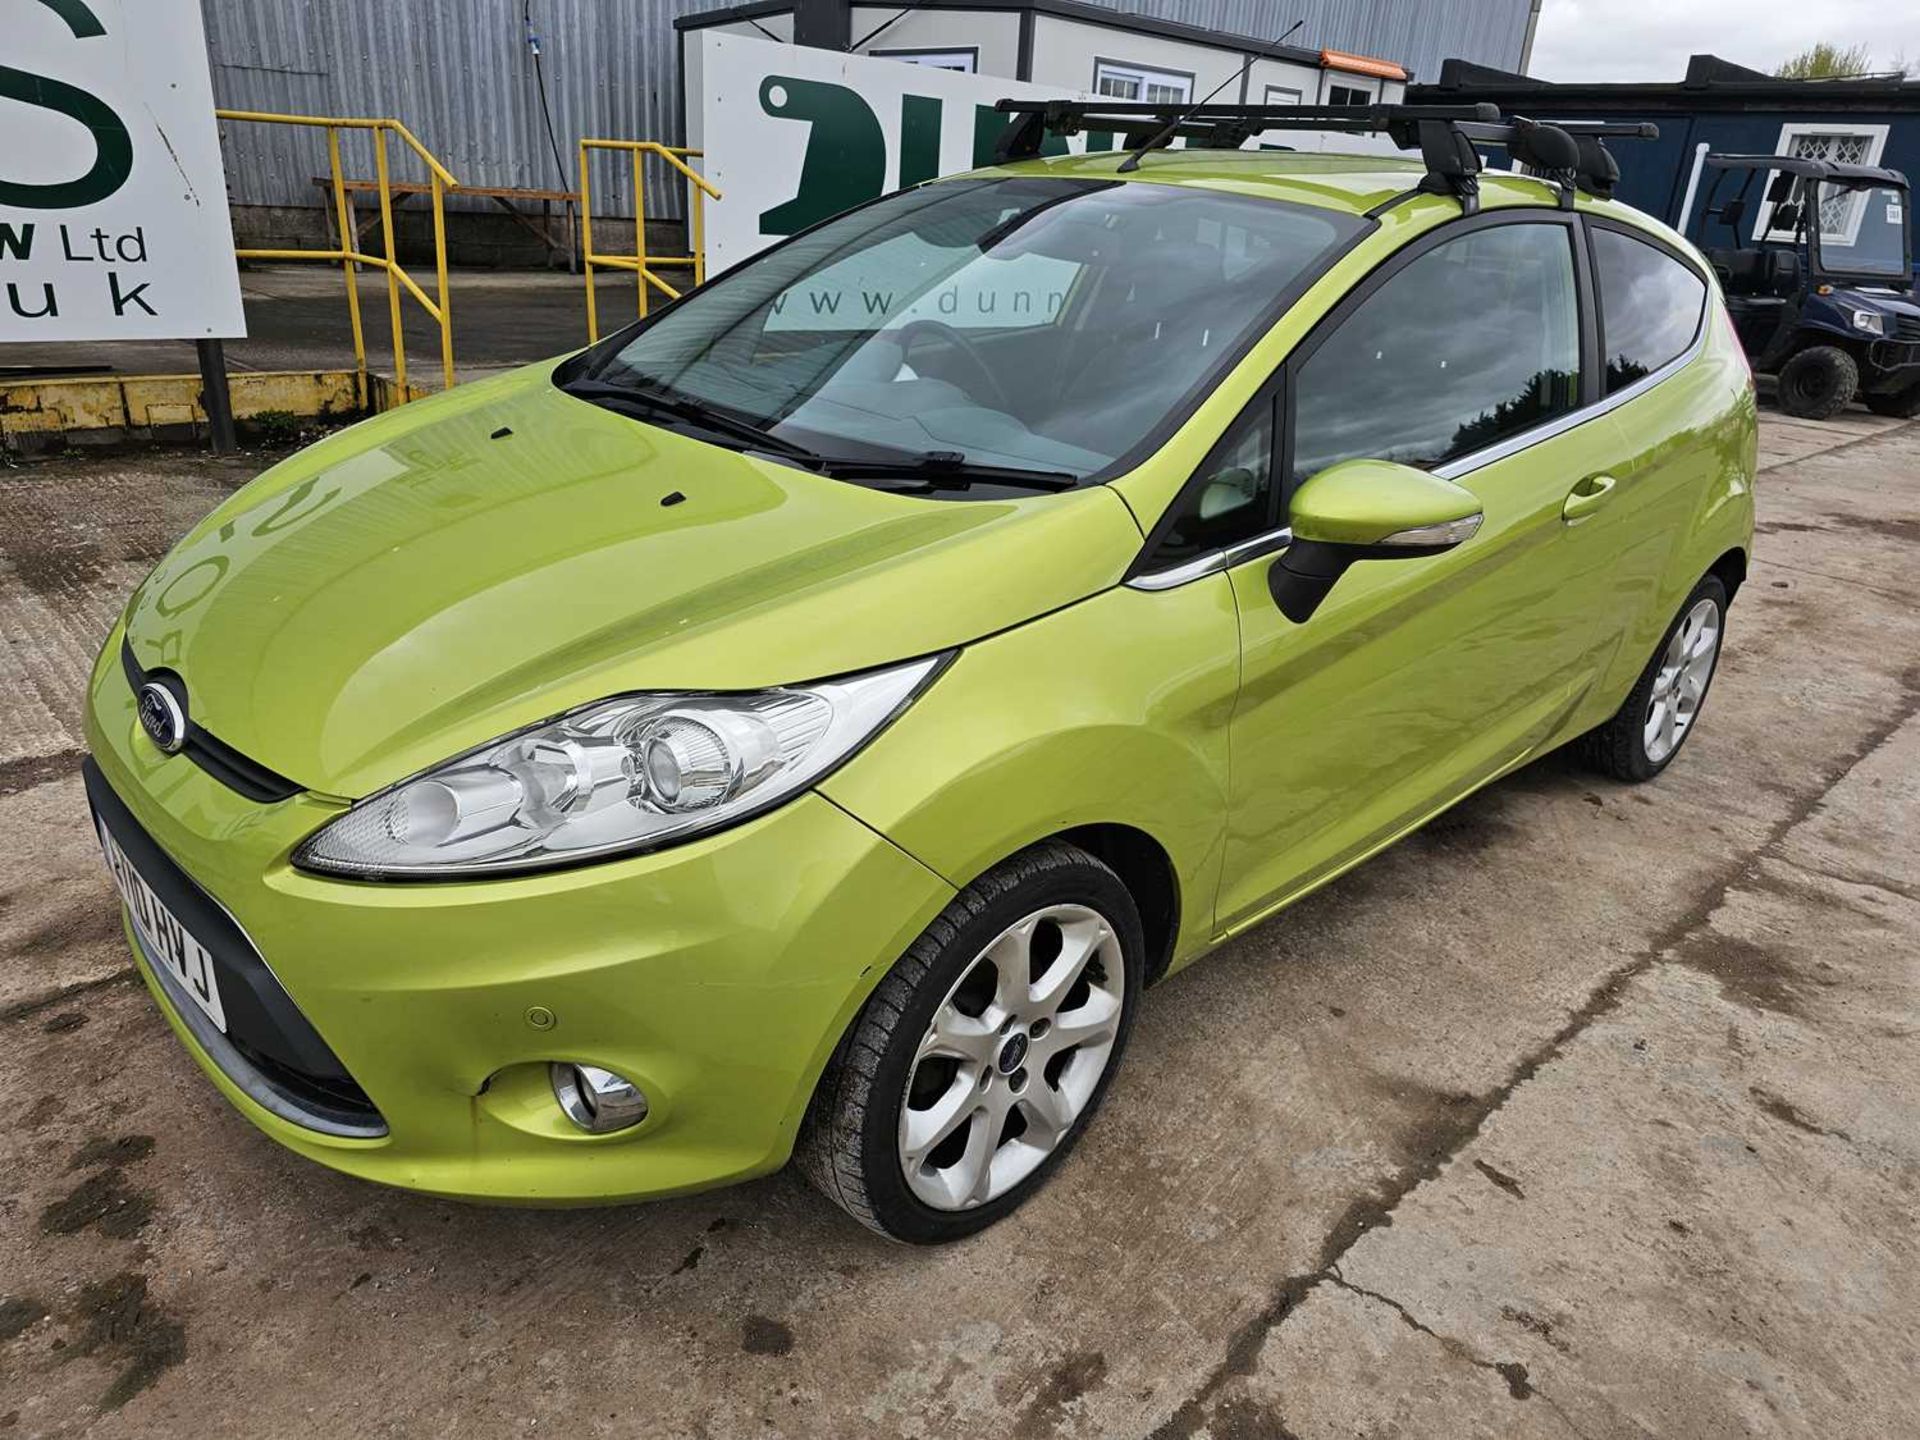 2010 Ford Fiesta Titanium, 5 Speed, Cruise Control, A/C (Reg. Docs. & Service History Available)